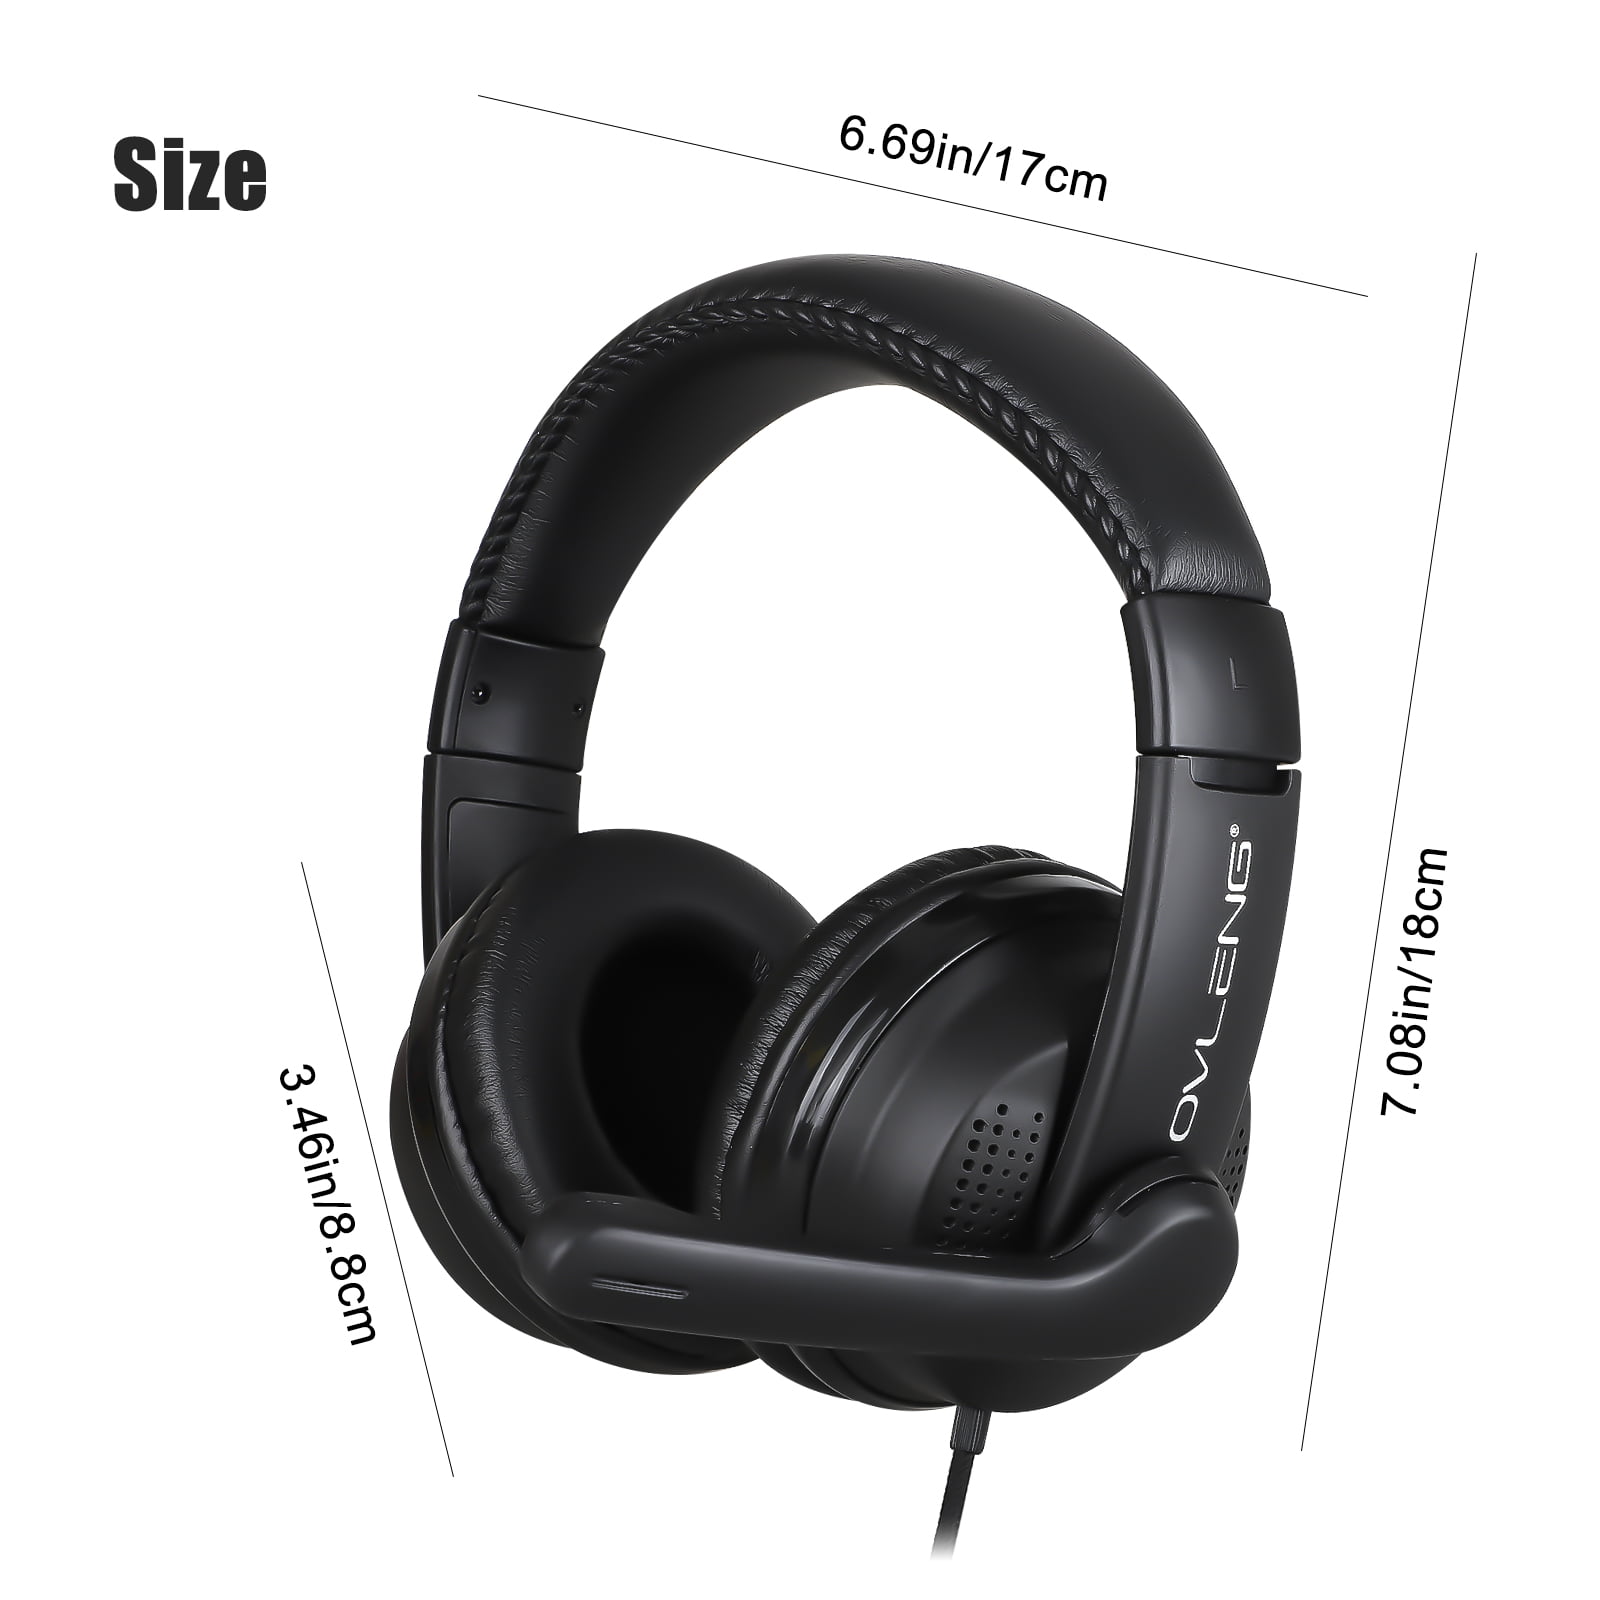 Tsv Stereo Gaming Headset With Noise Canceling Mic 3 5mm Surround Sound Gaming Headphones With Volume Control Soft Memory Earmuffs Fits For Ps4 Xbox One Pc Nintendo 3ds Laptop Psp Tablet - rotate resize tool headphone transparent roblox